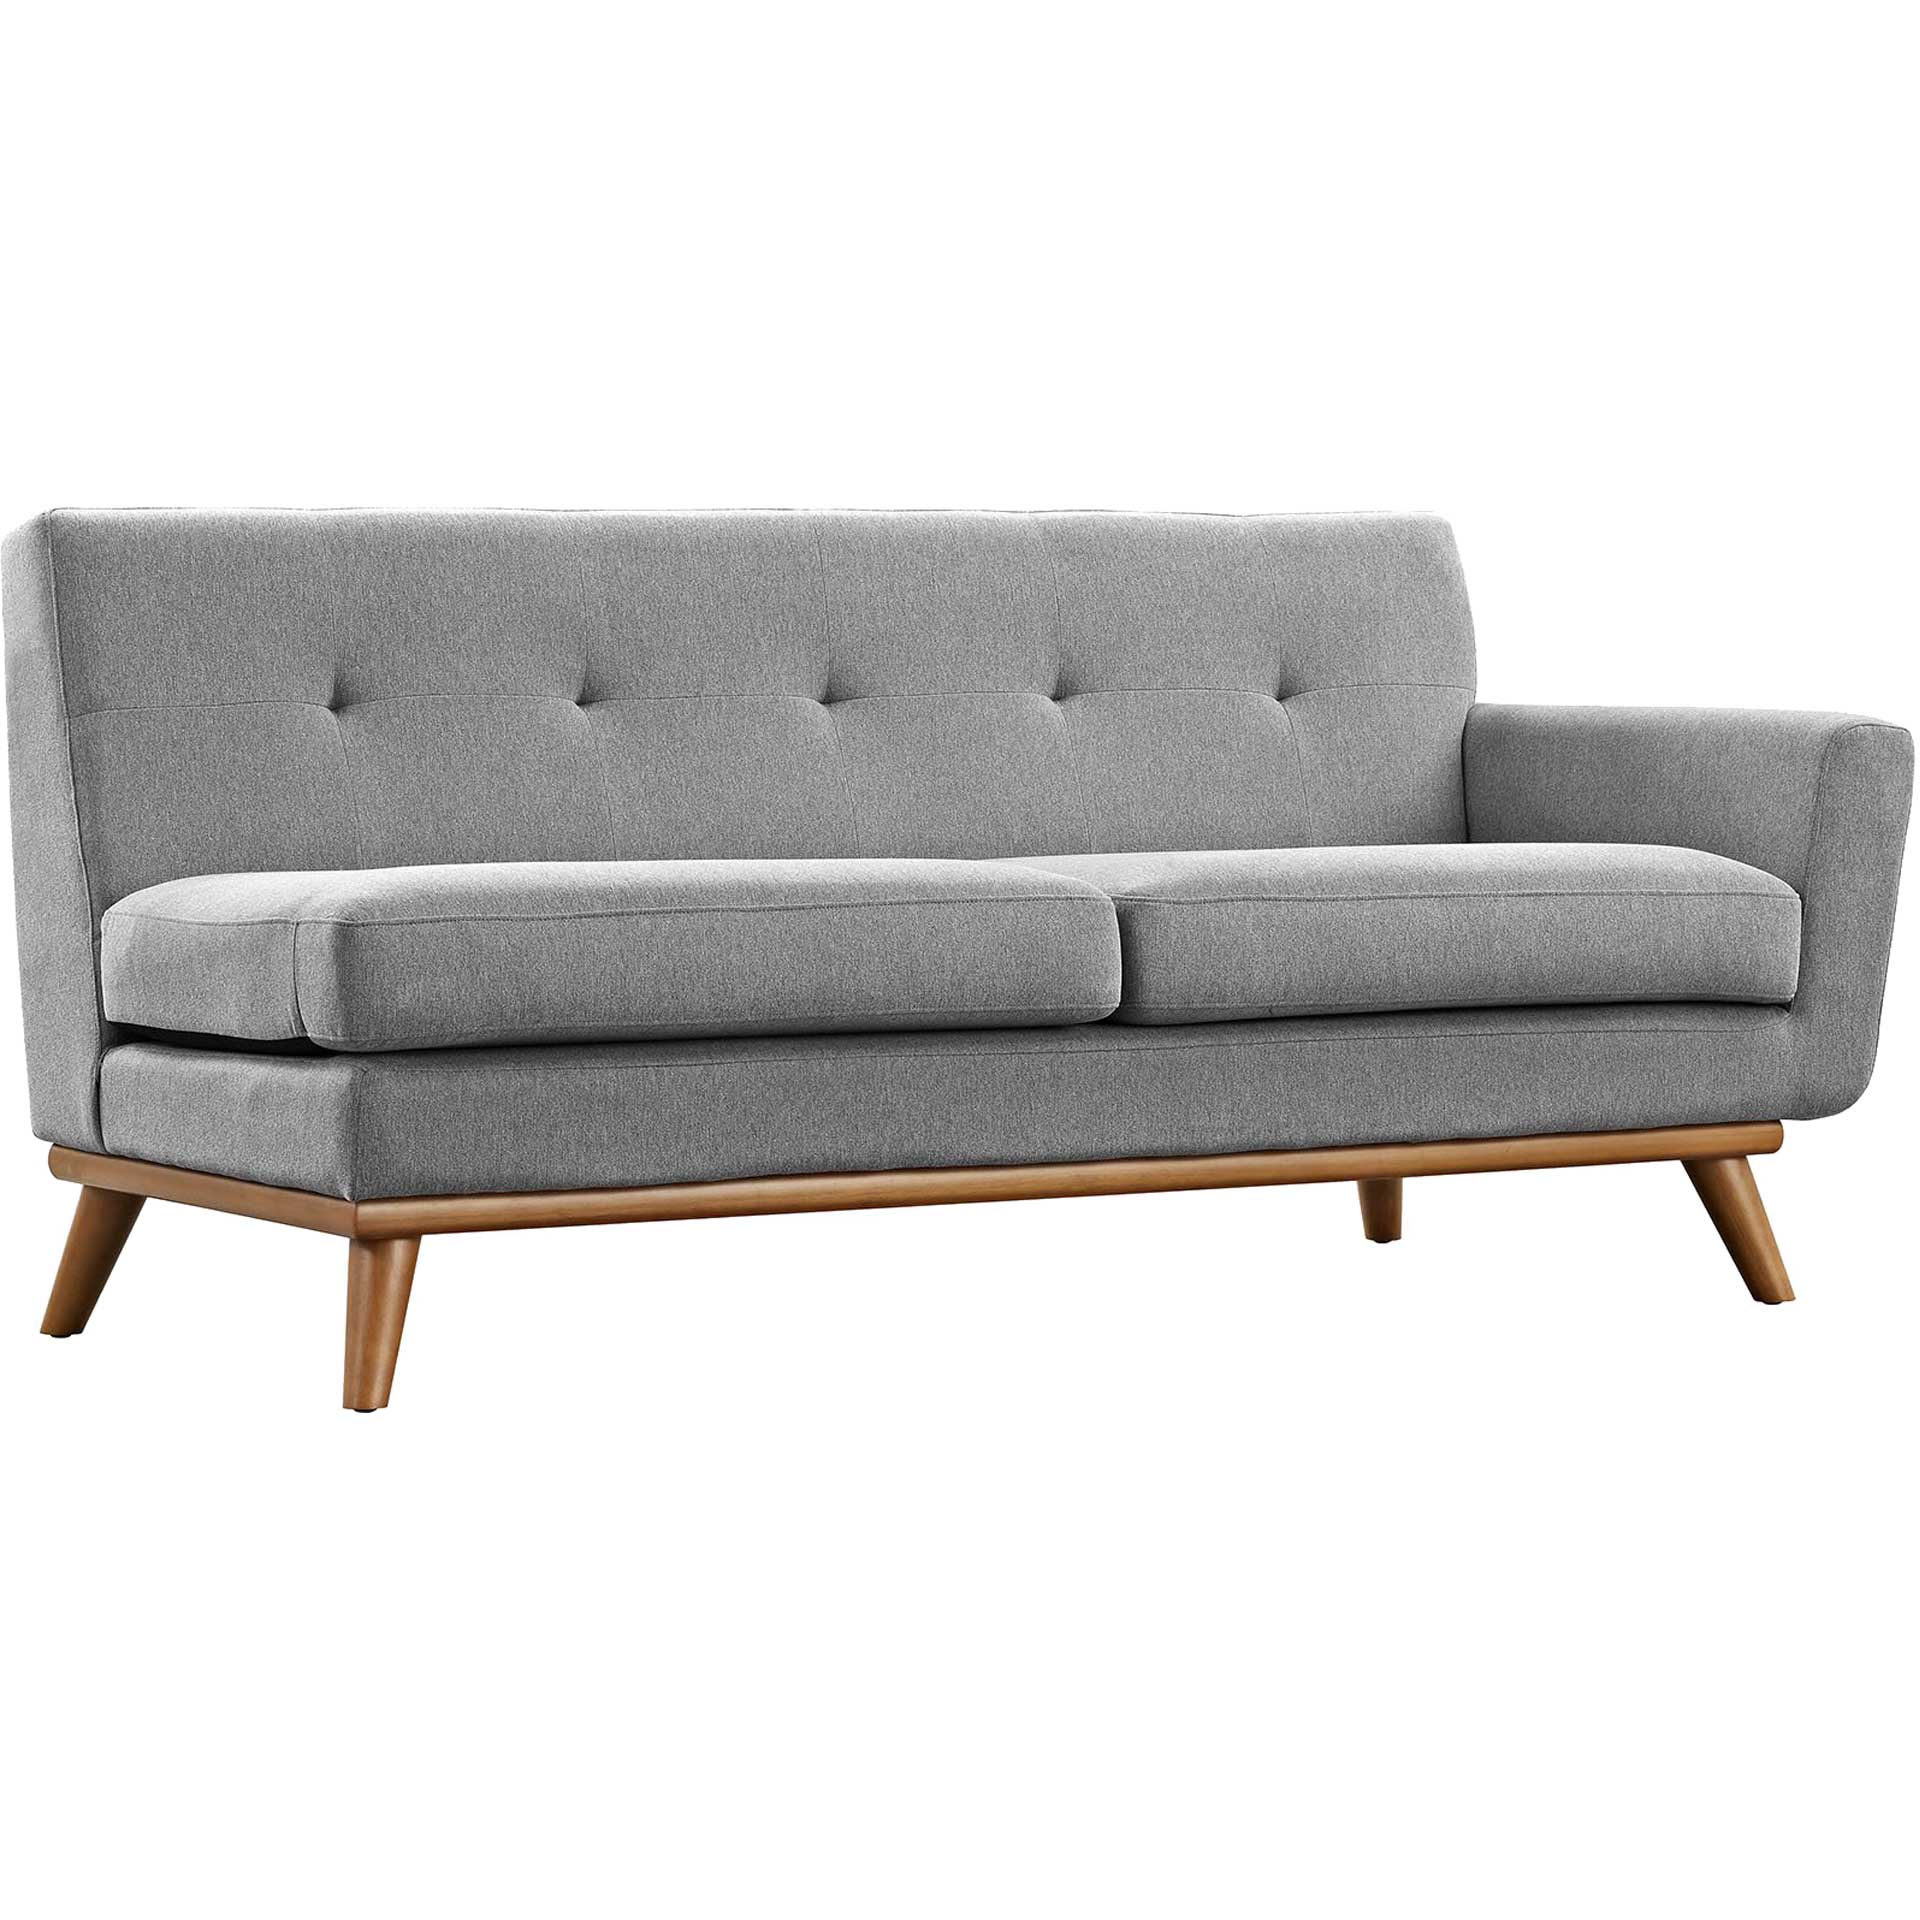 Emory L-Shaped Sectional Sofa Expectation Gray